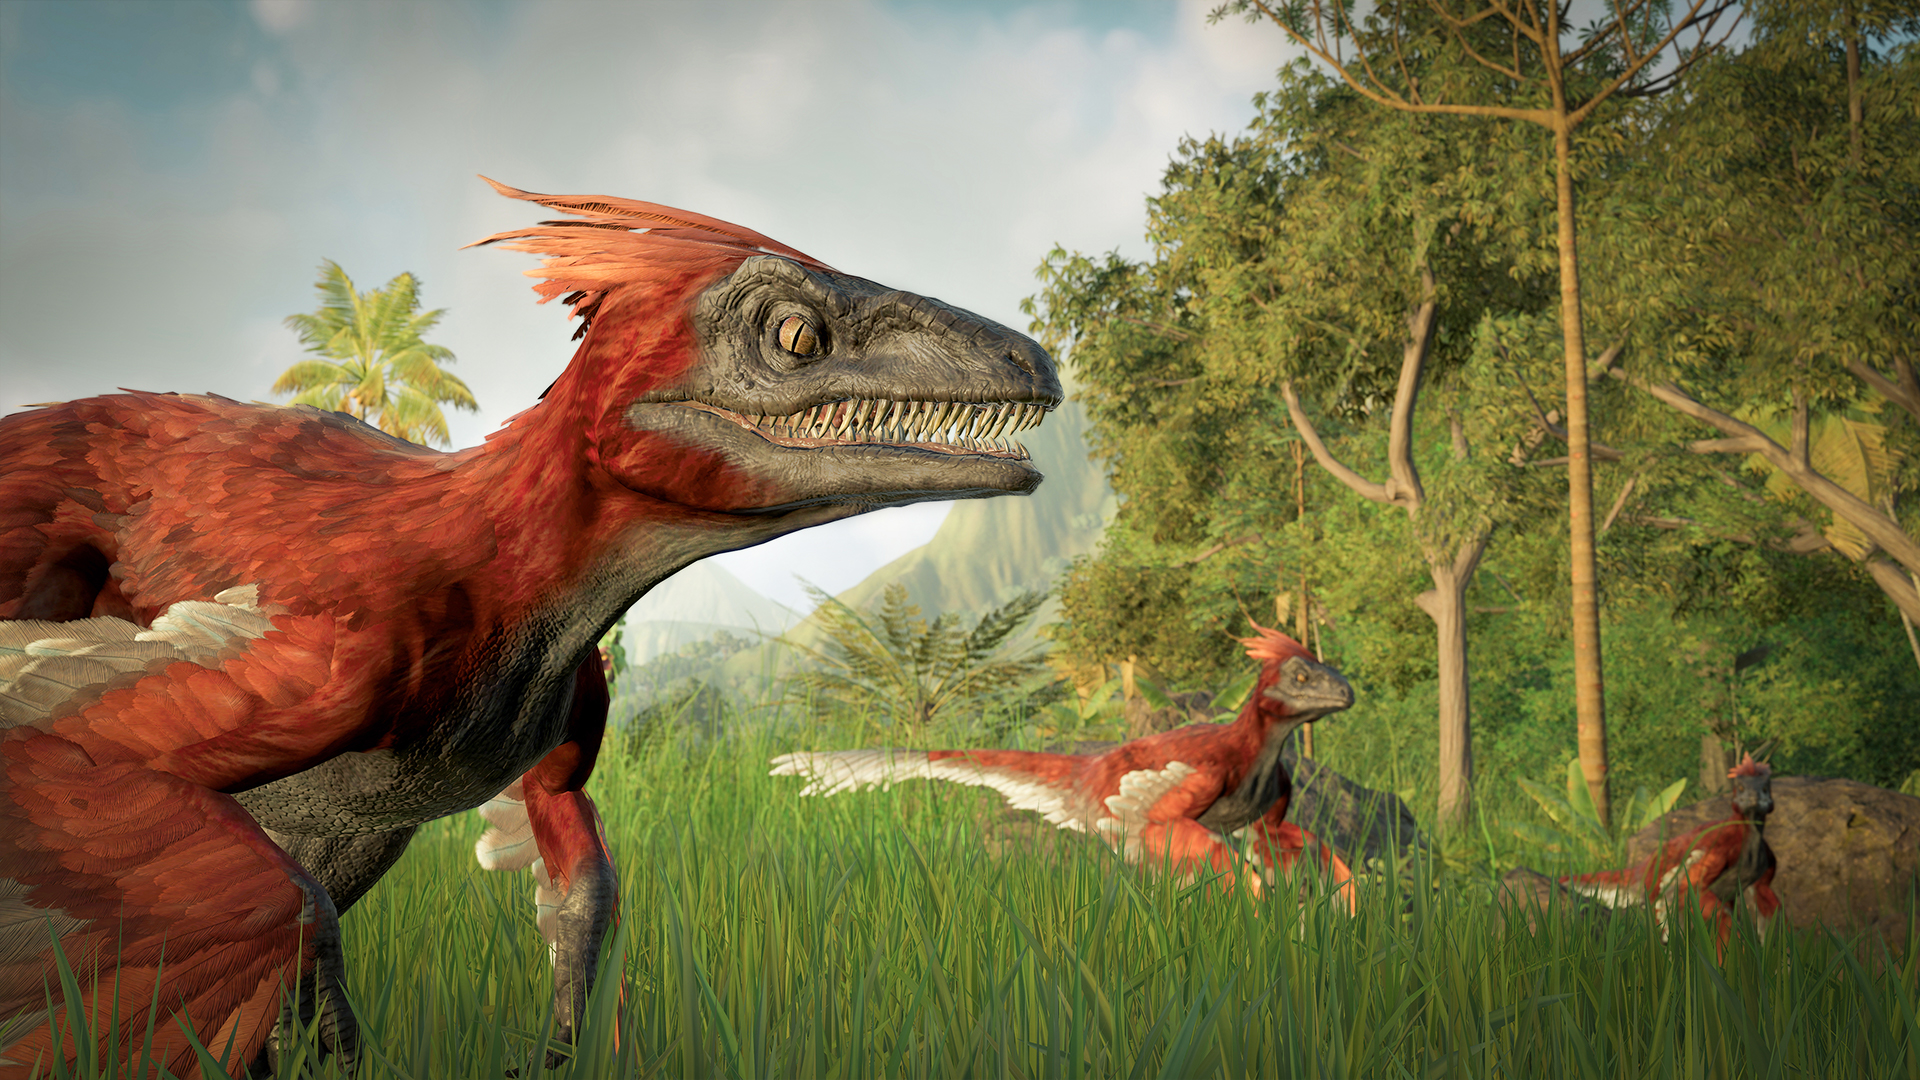 jurassic-world-evolution-2-dominion-biosyn-expansion-adds-dinos-from